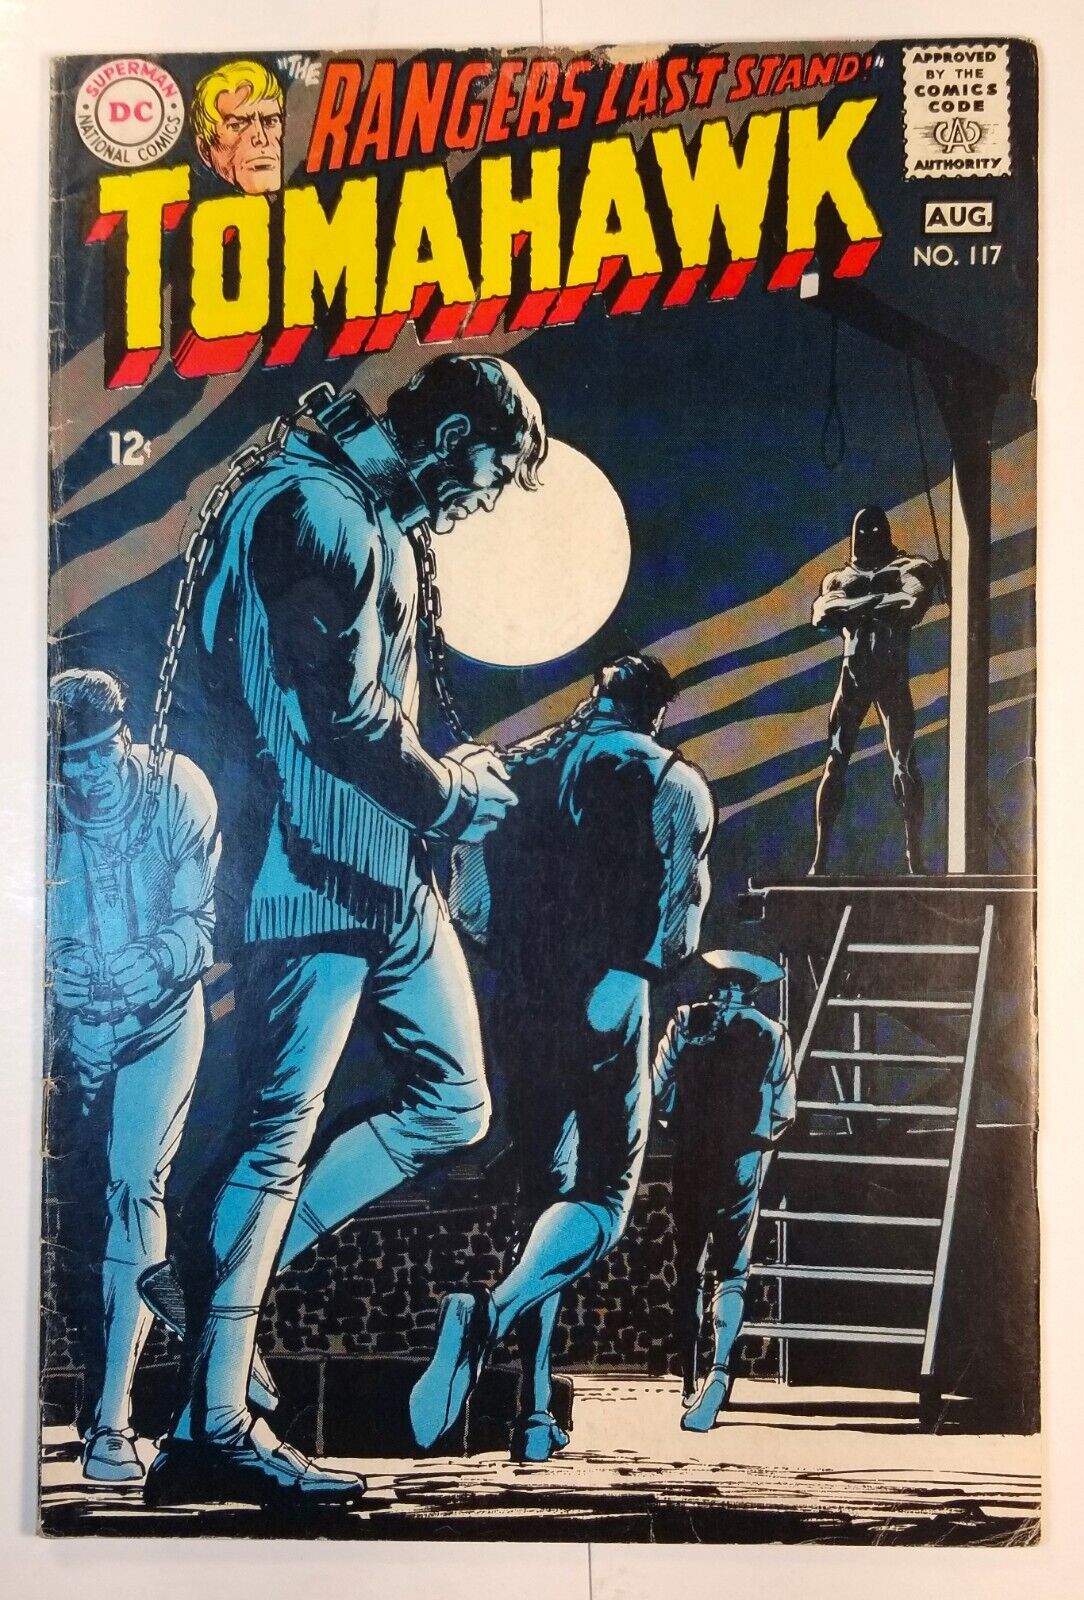 TOMAHAWK #117 DC COMICS 1968 NEAL ADAMS COVER F- 5.5 FRED RAY COMBINED SHIPPING